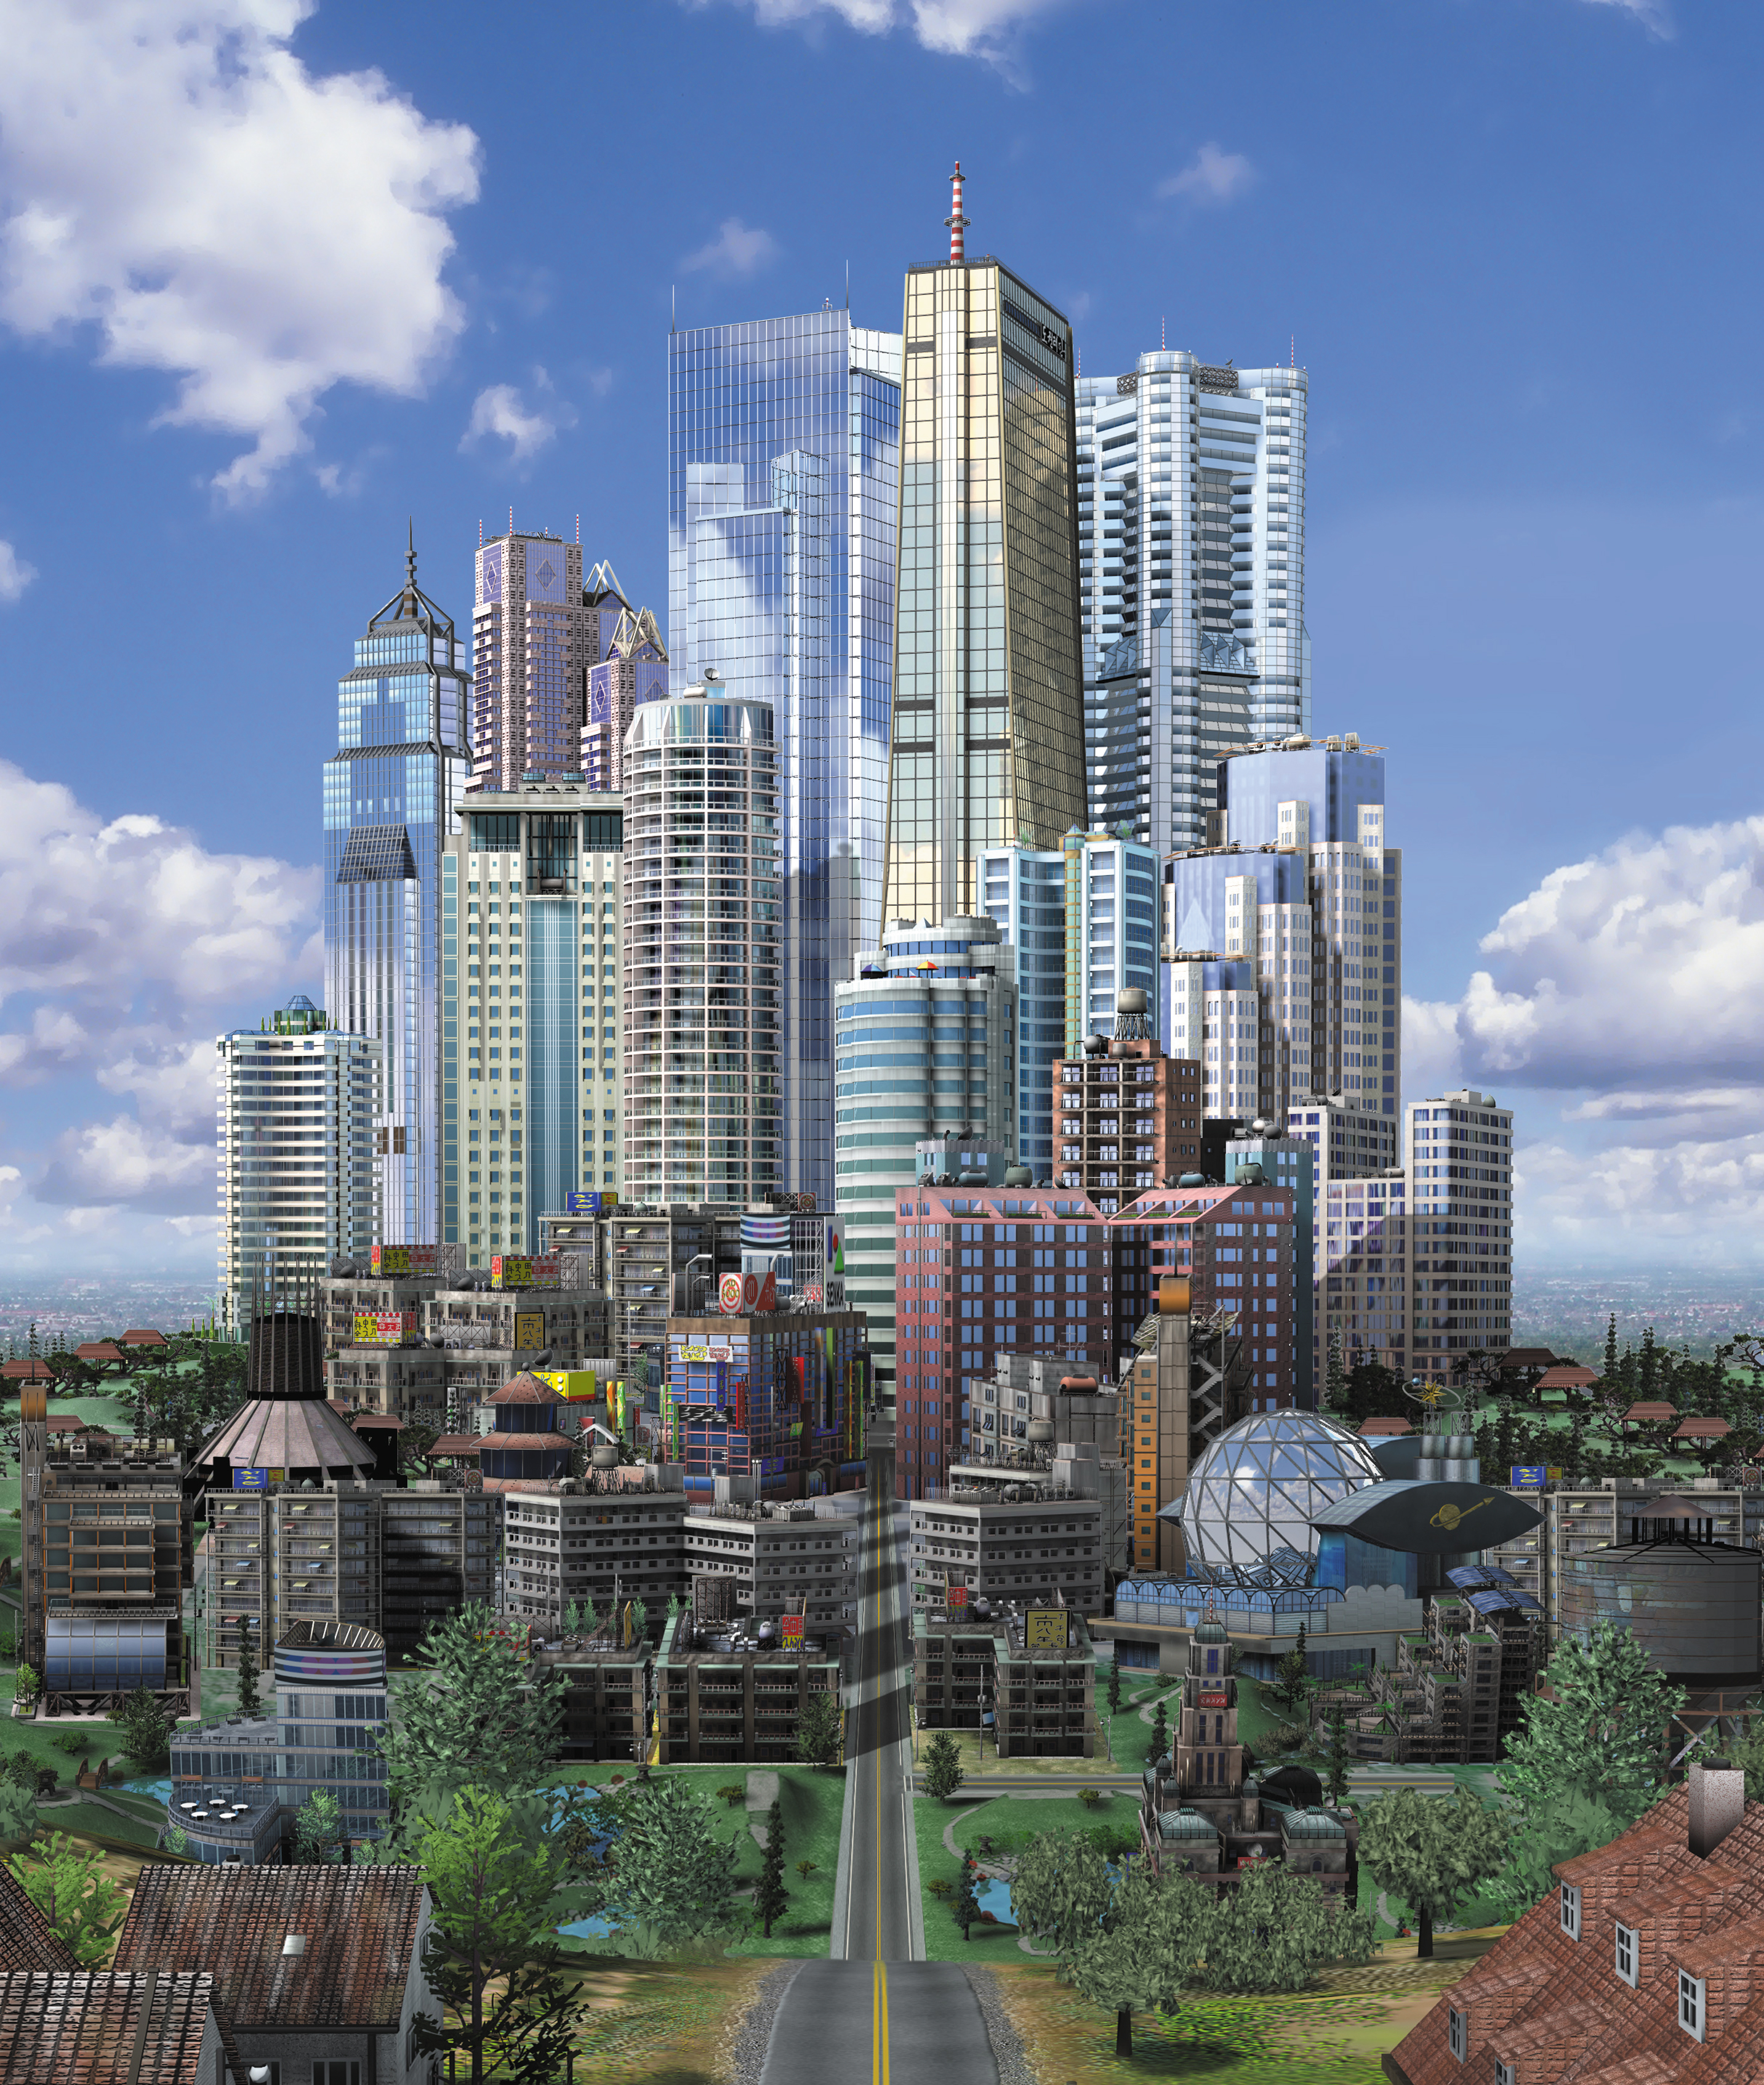 simcity pc requirements